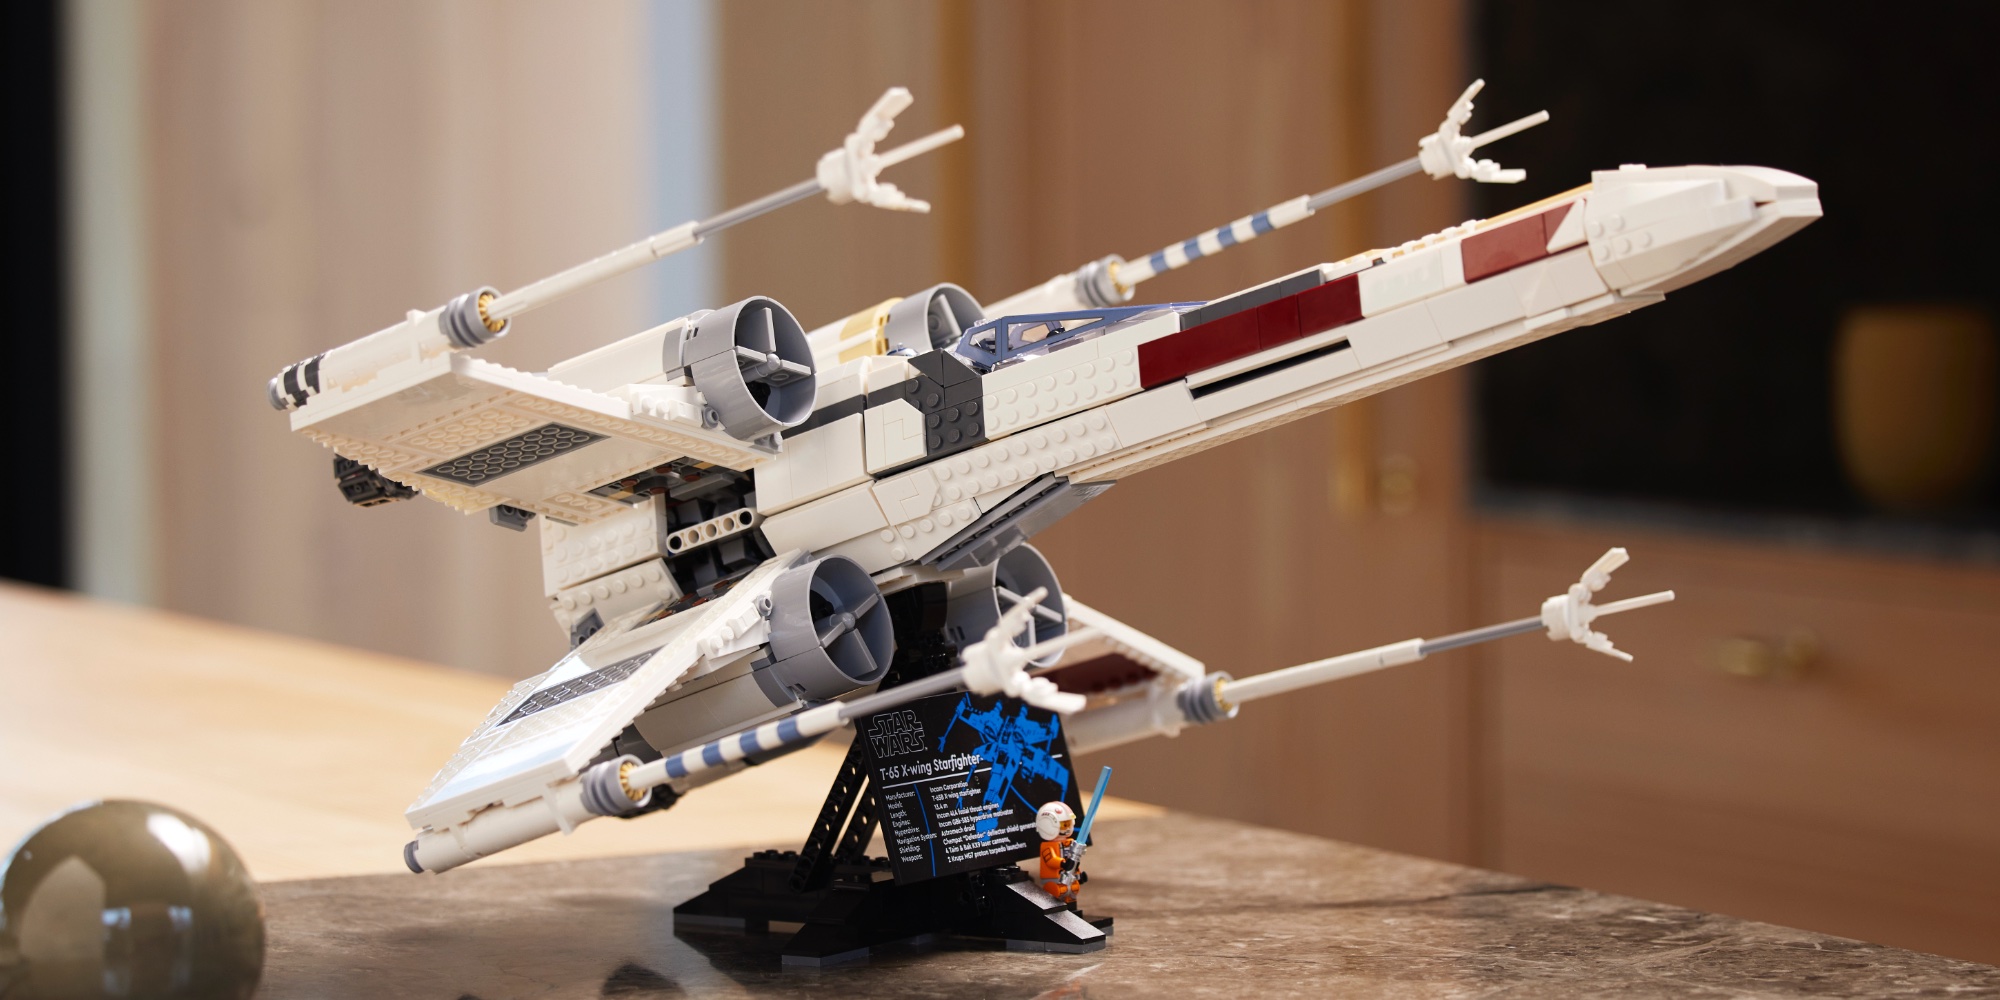 https://9to5toys.com/wp-content/uploads/sites/5/2023/04/LEGO-UCS-X-Wing-reveal-ship.jpg